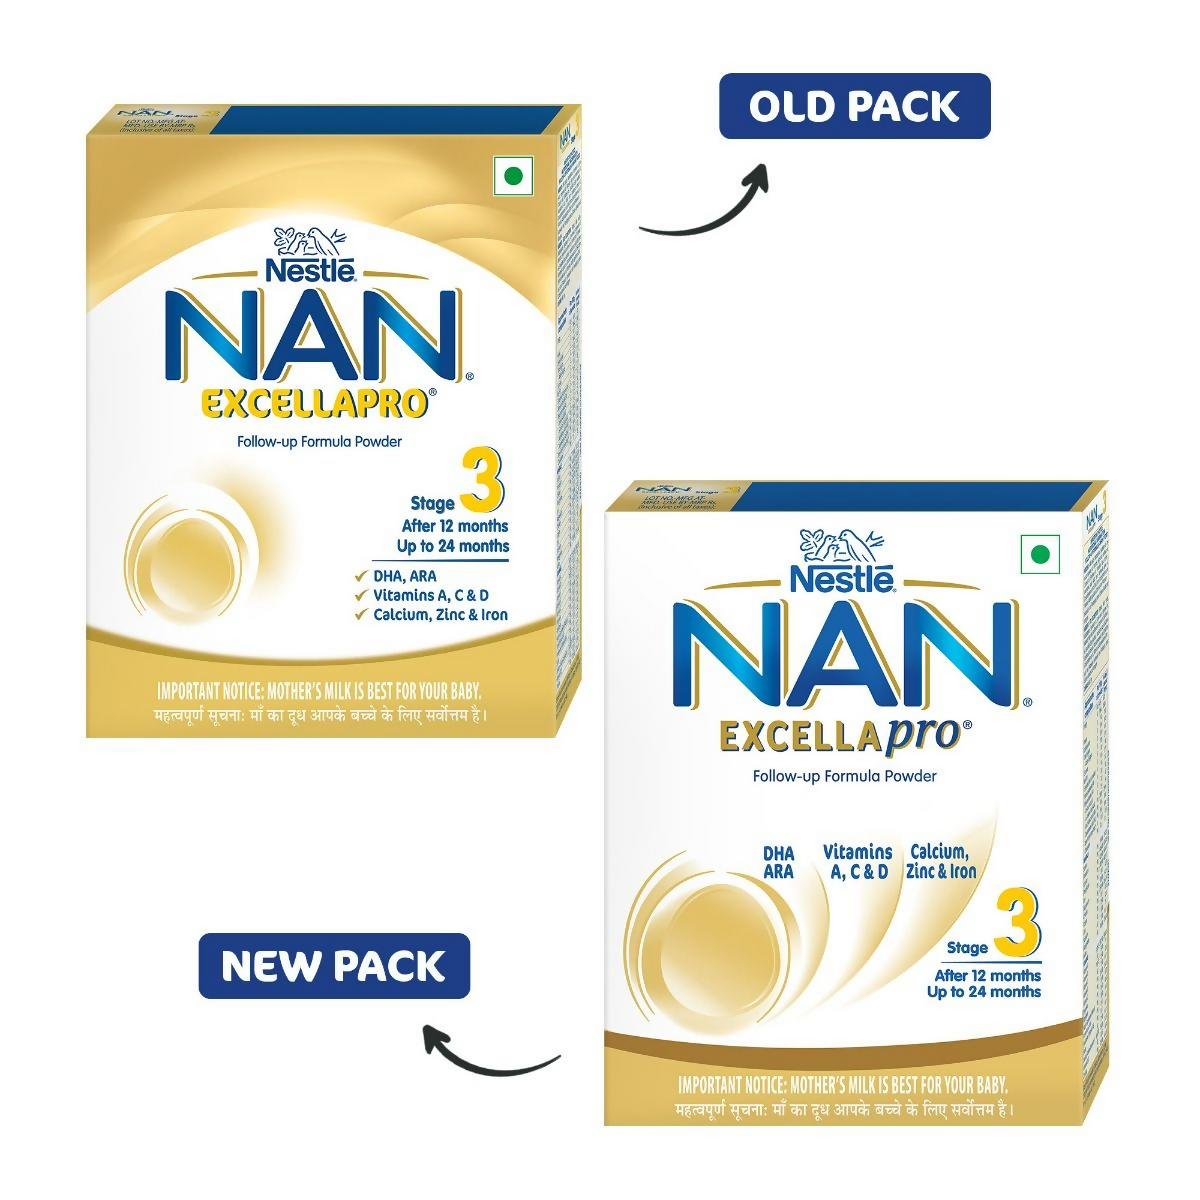 Nestle Nan Excellapro Follow-Up Formula Powder - Stage 3 (After 12 Months)